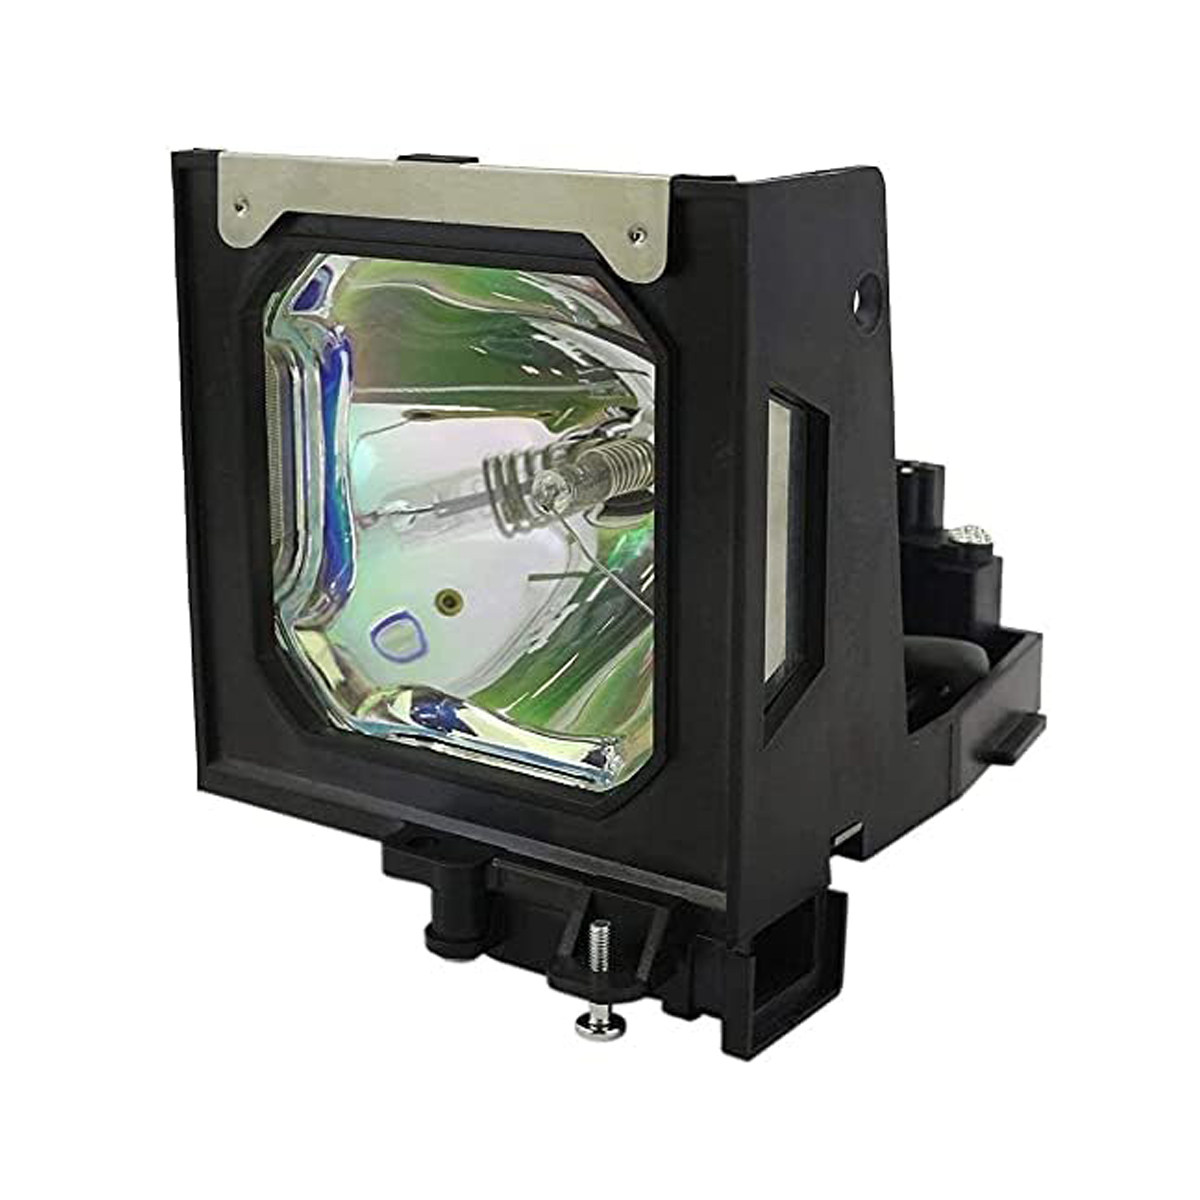 Replacement Projector lamp 03-000712-01P For CHRISTIE VIVID LX32/VIVID LX34